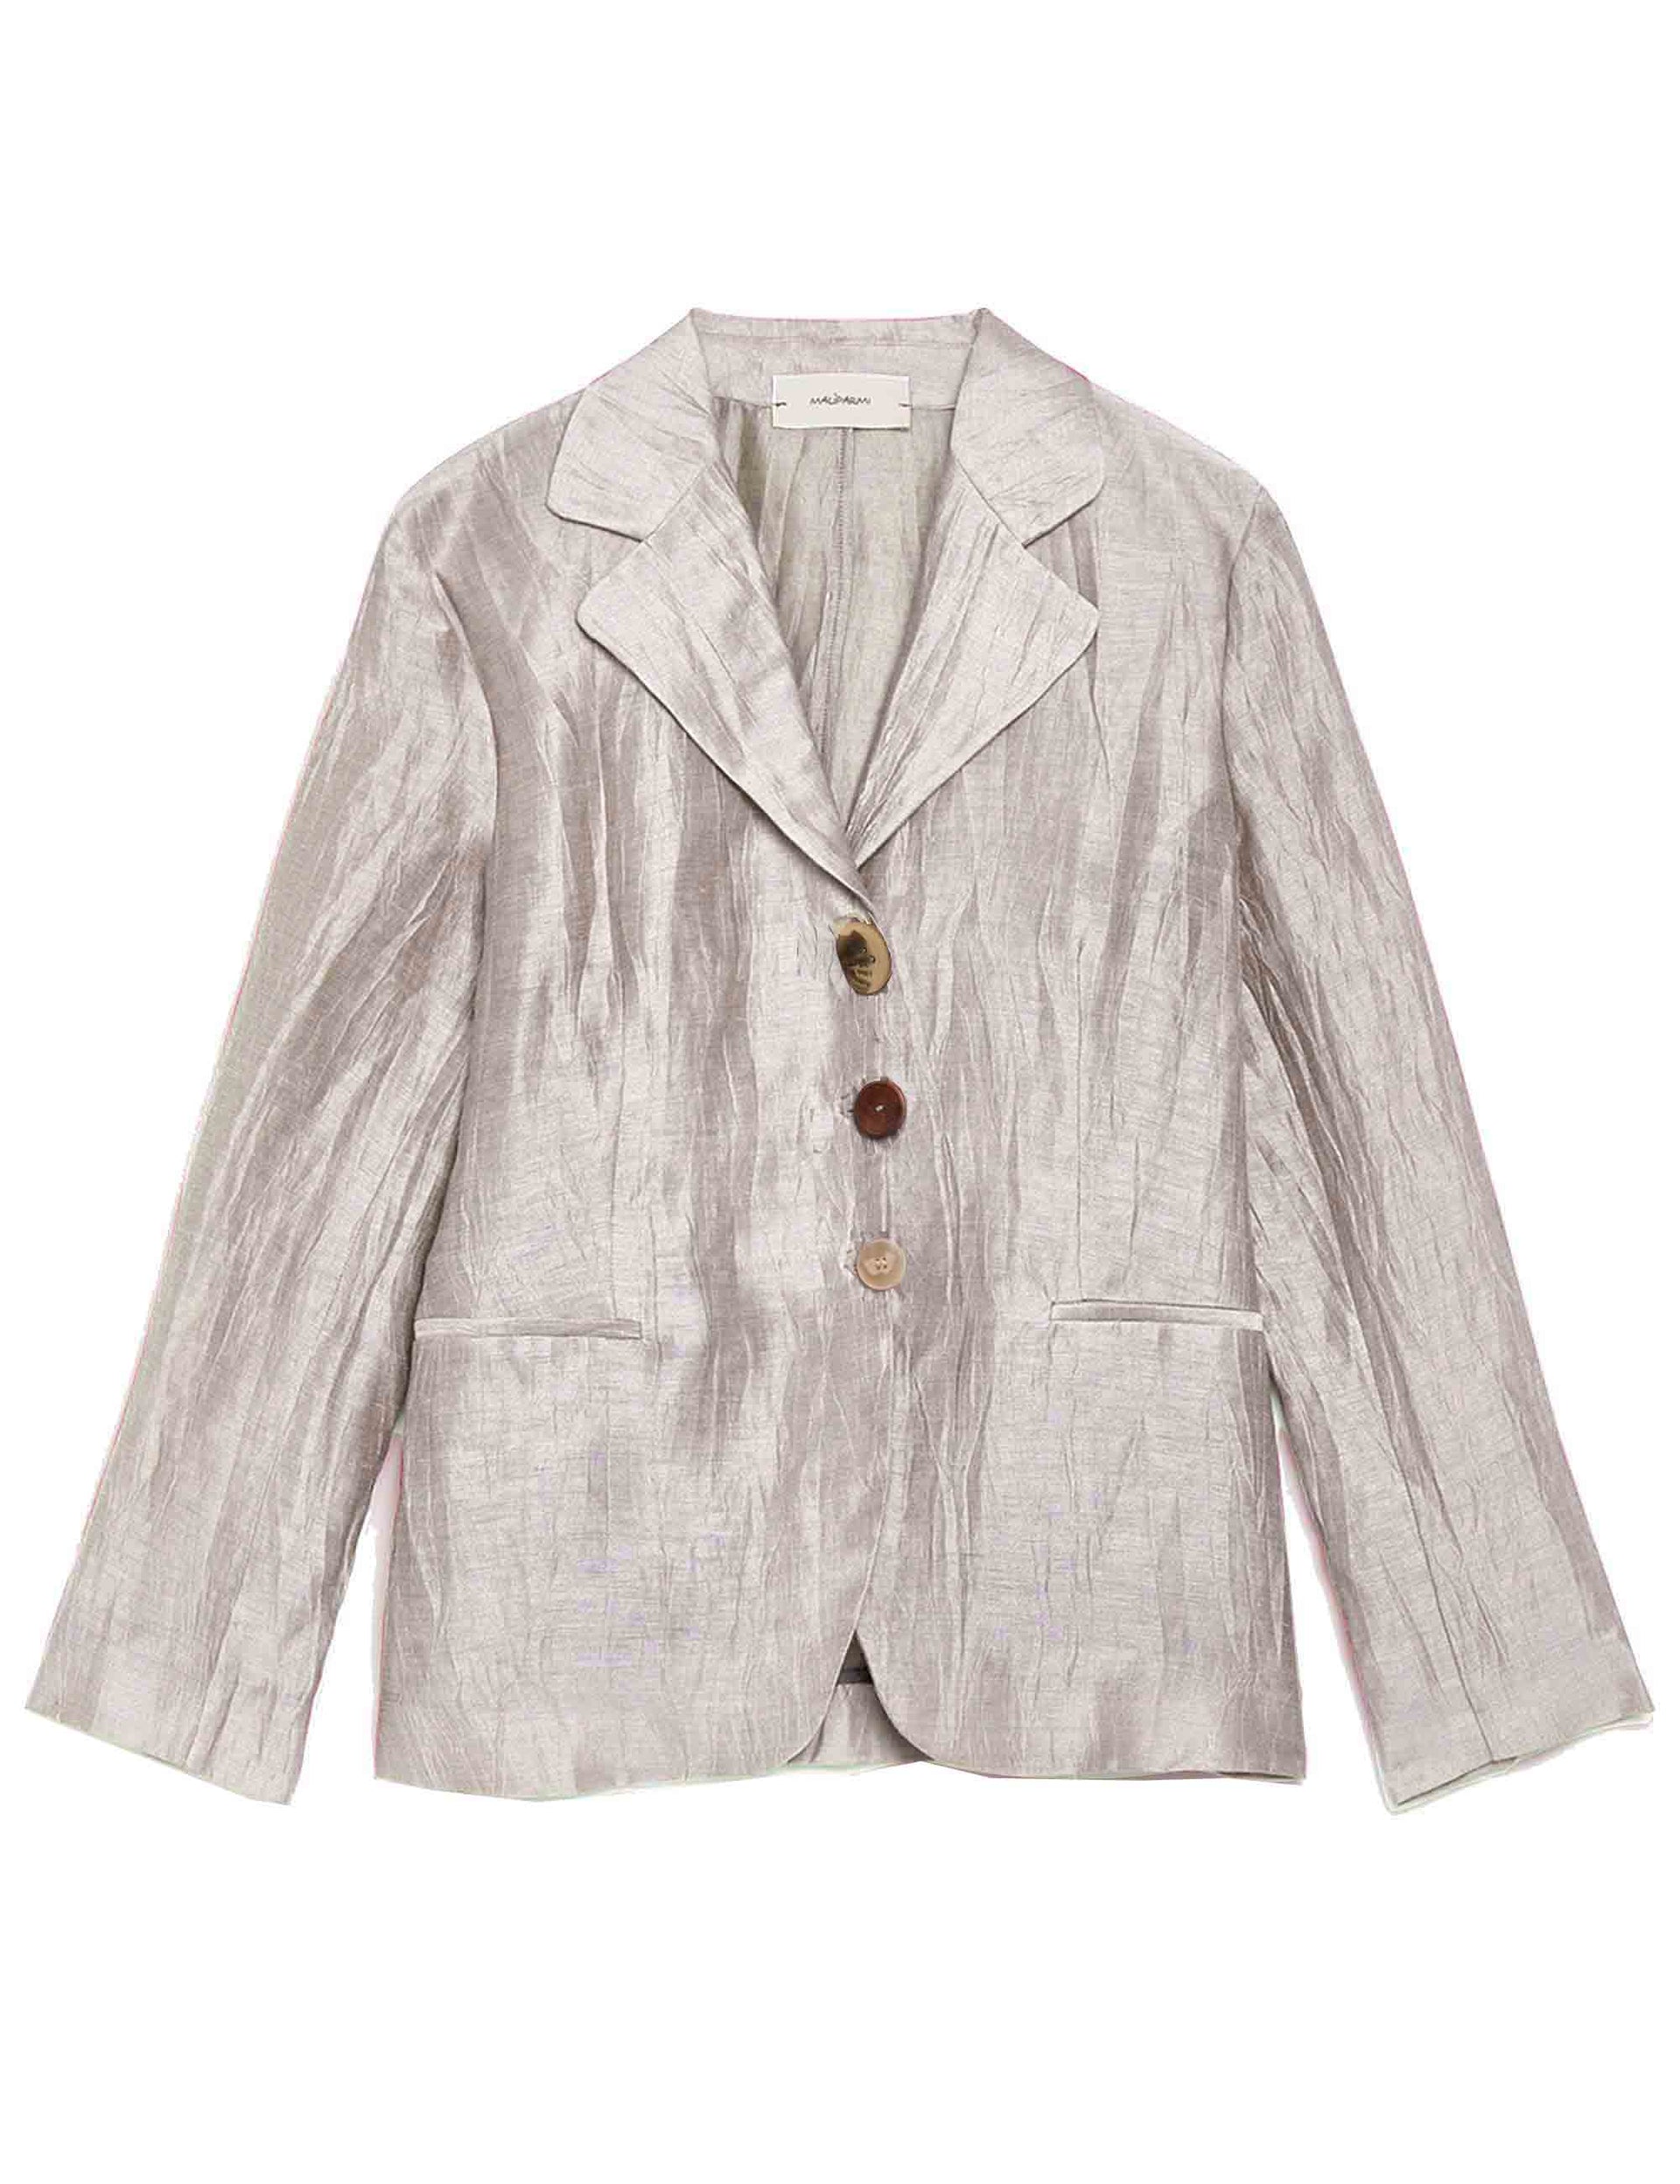 Froisse women's single-breasted jackets in white linen